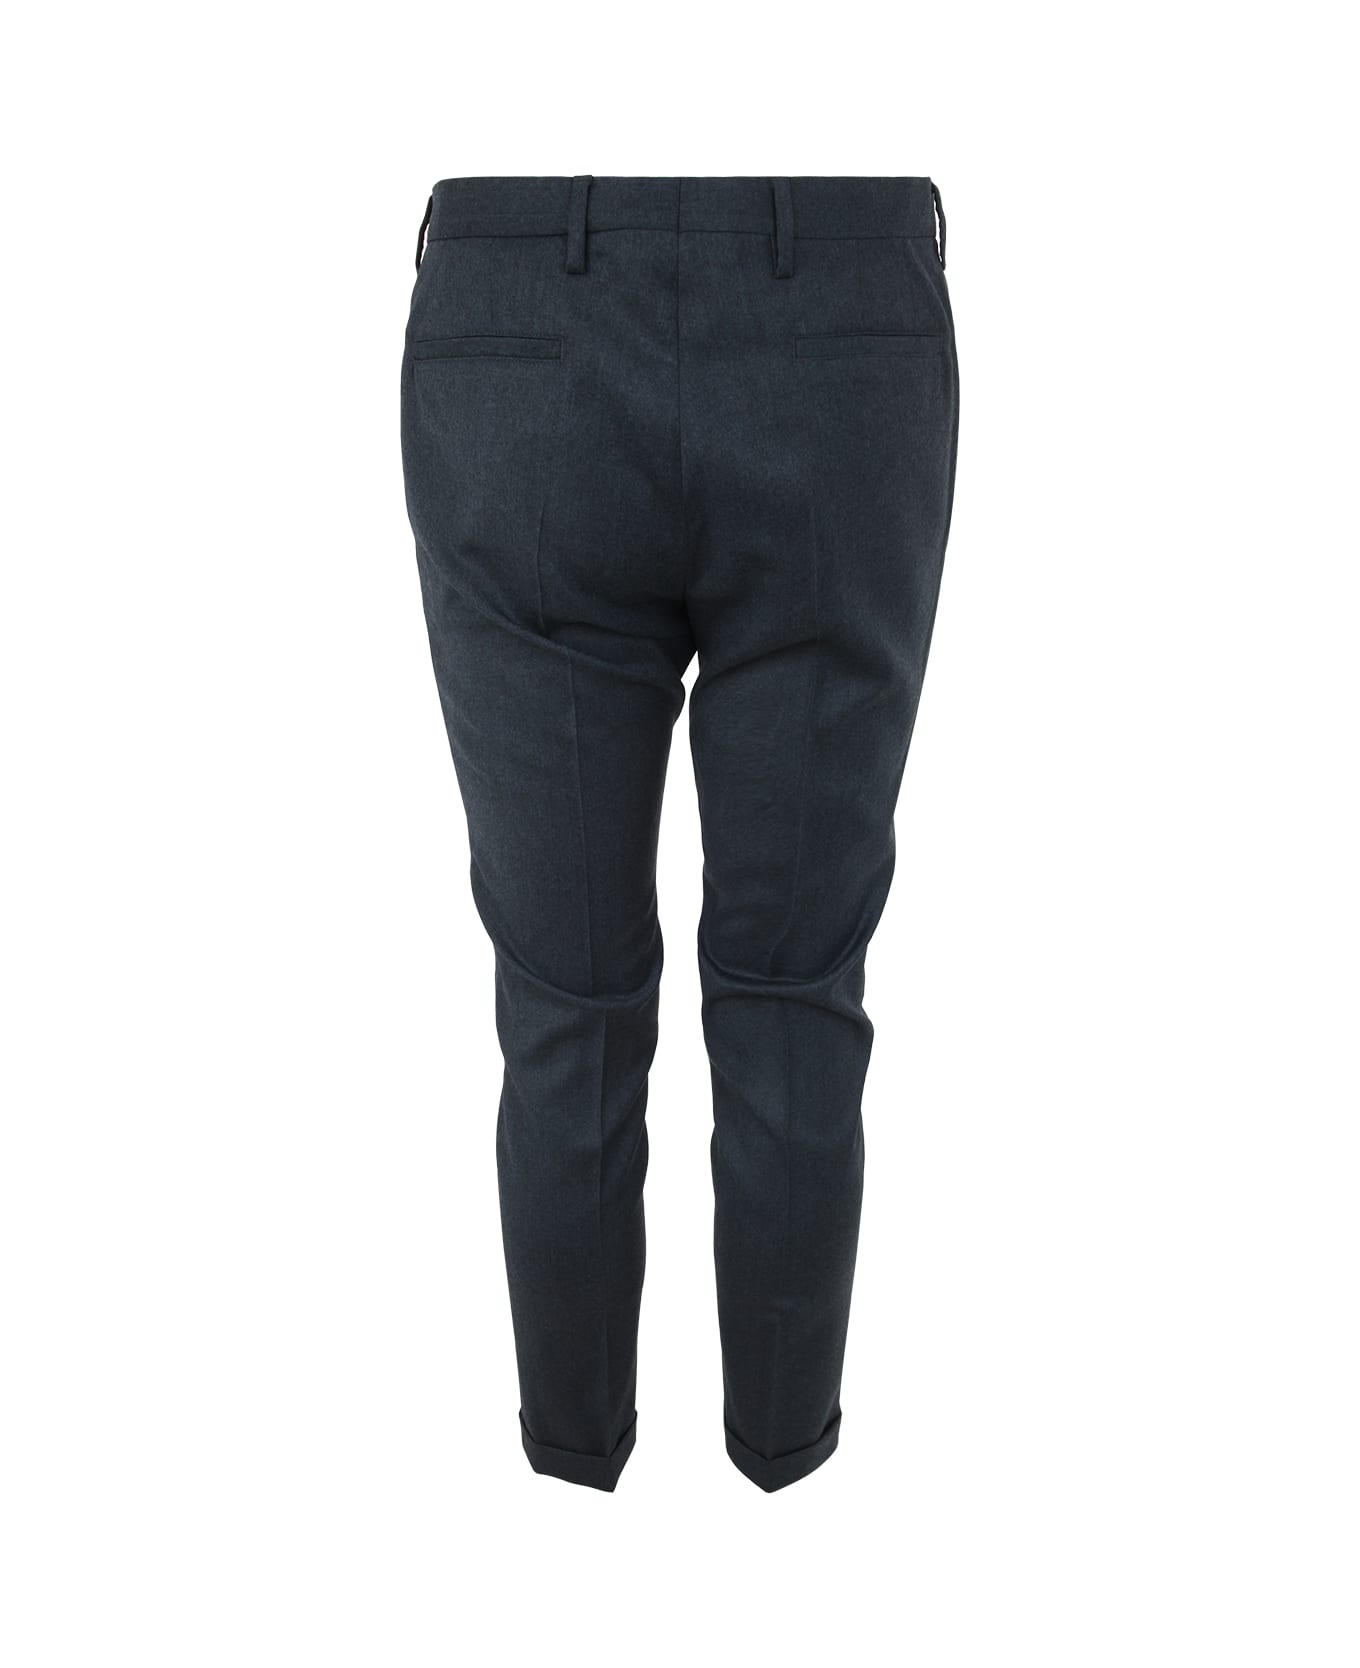 Paul Smith Gents Trousers - A Petrol Blue ボトムス